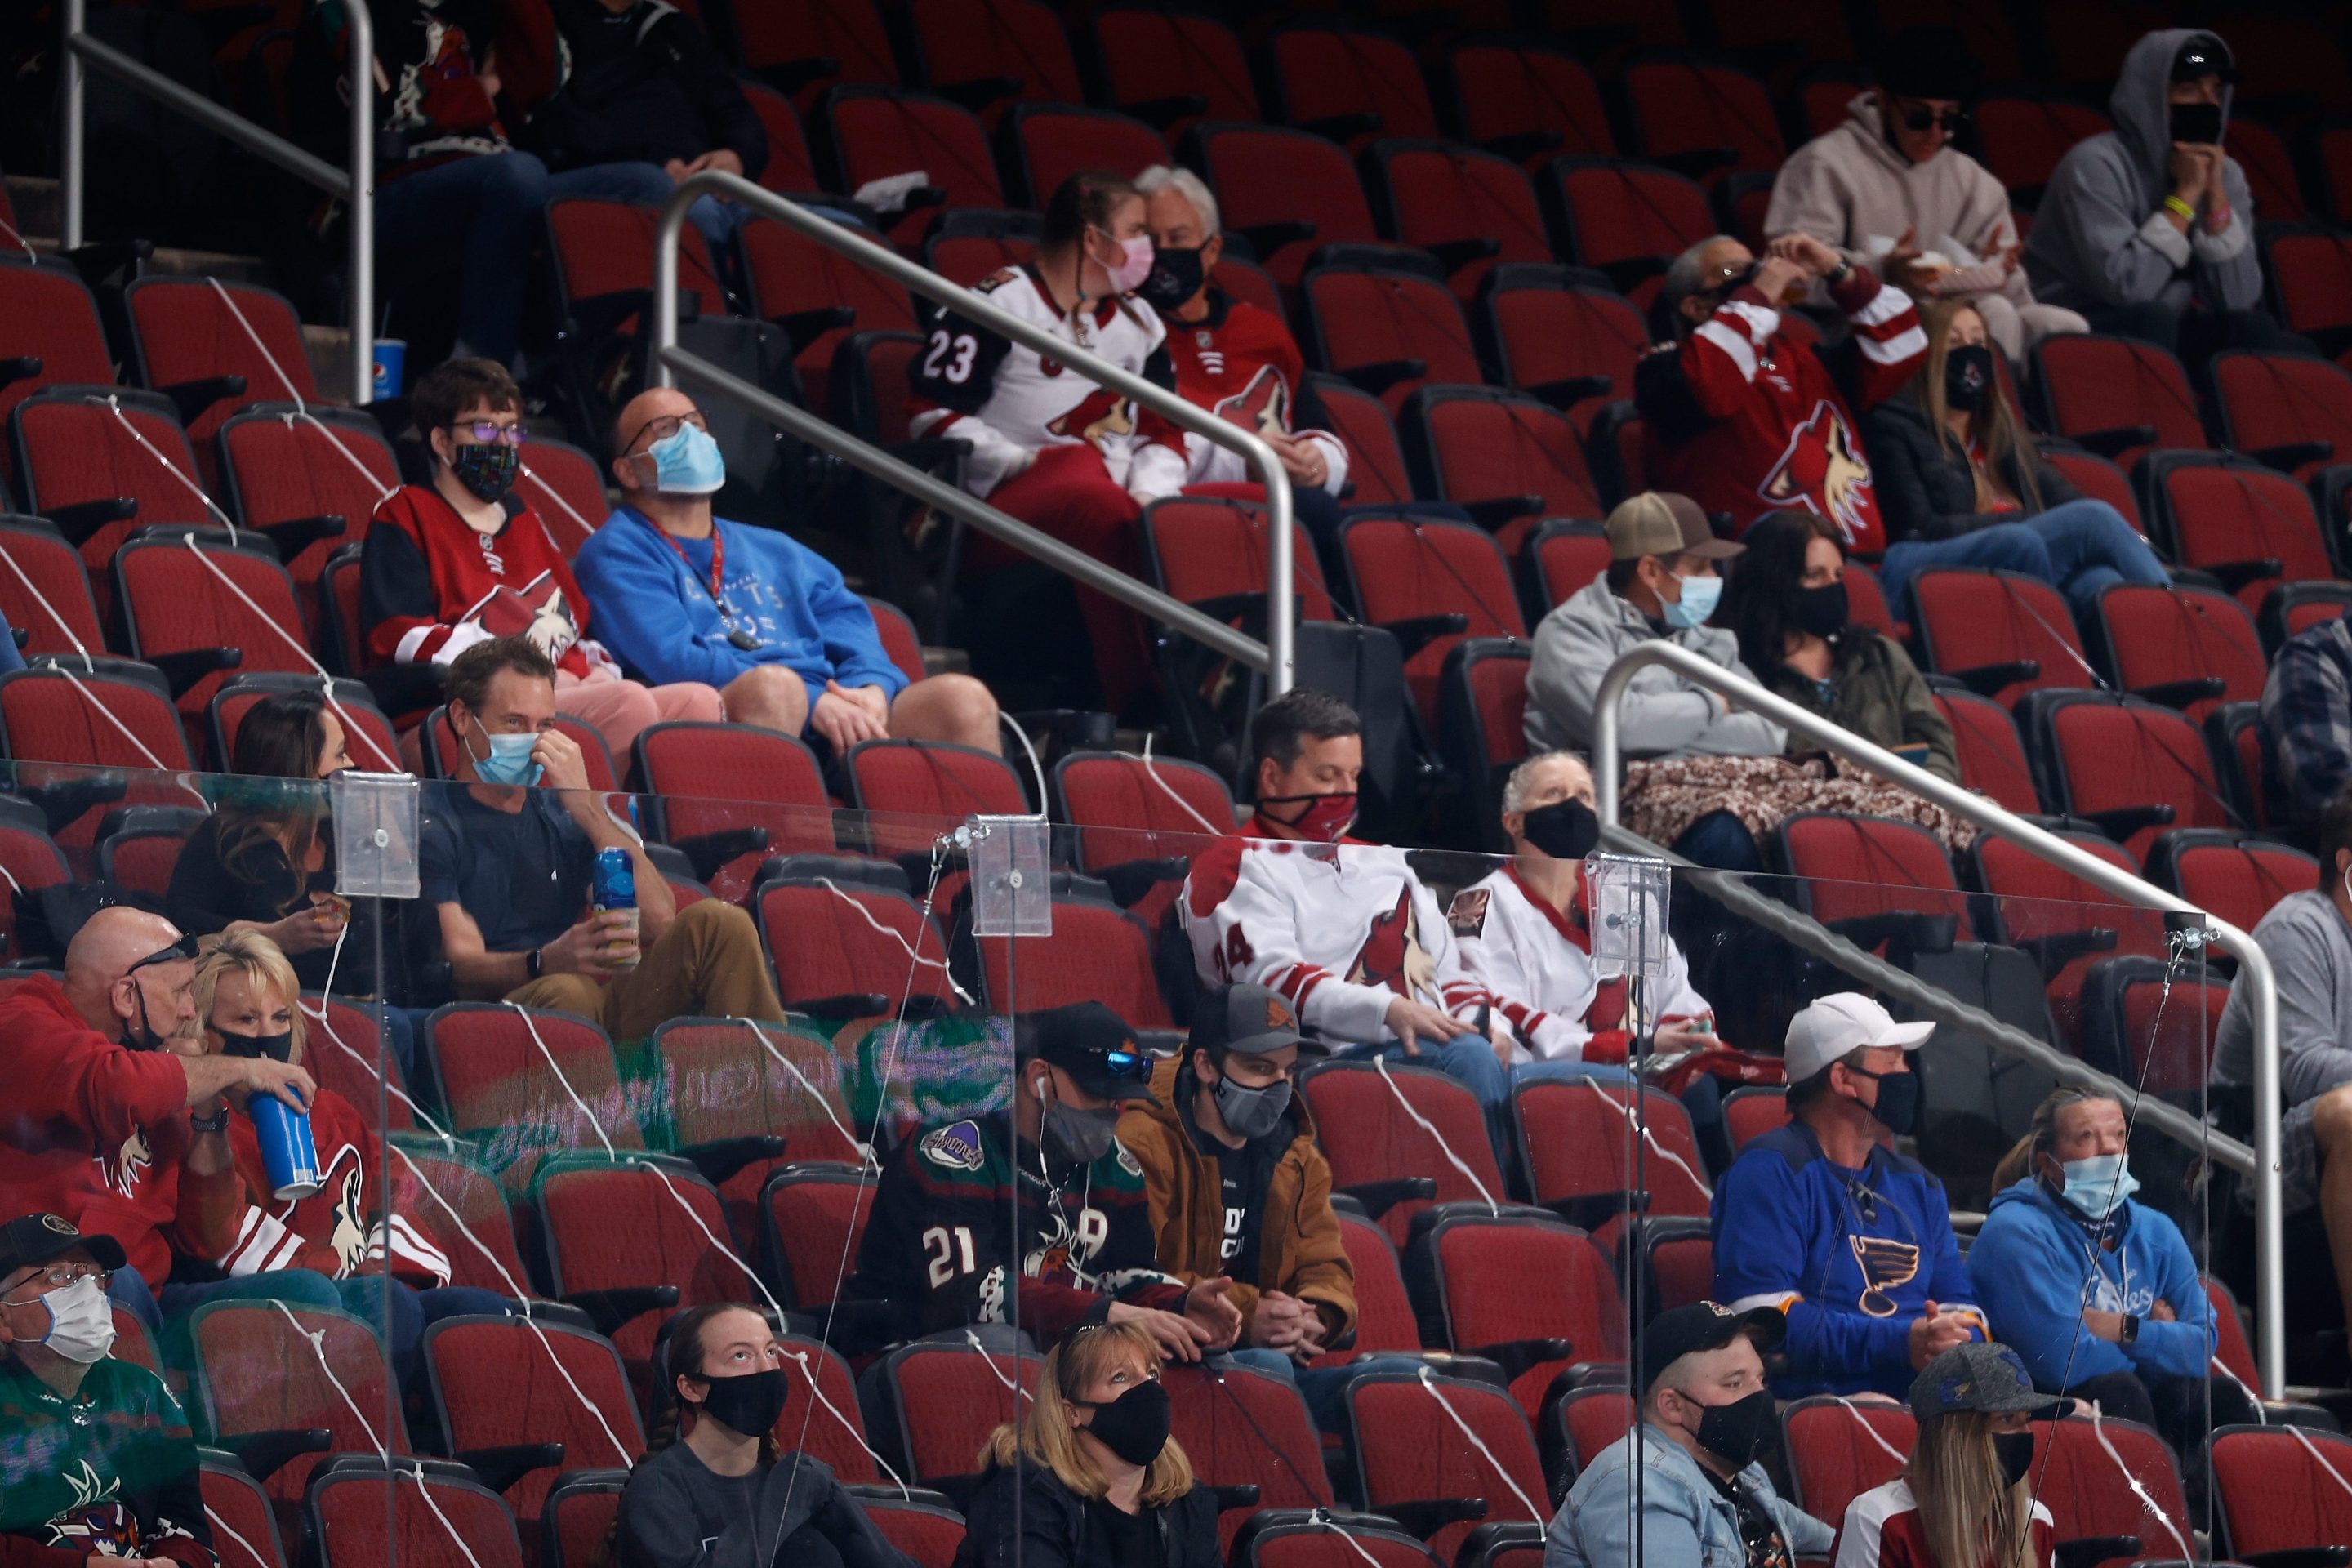 Fans watch from behind an extra sheet of plexy-glass, designed for greater protection, during the first period of the NHL game between the St. Louis Blues and the Arizona Coyotes at Gila River Arena on February 15, 2021 in Glendale, Arizona. The stands are mostly empty.